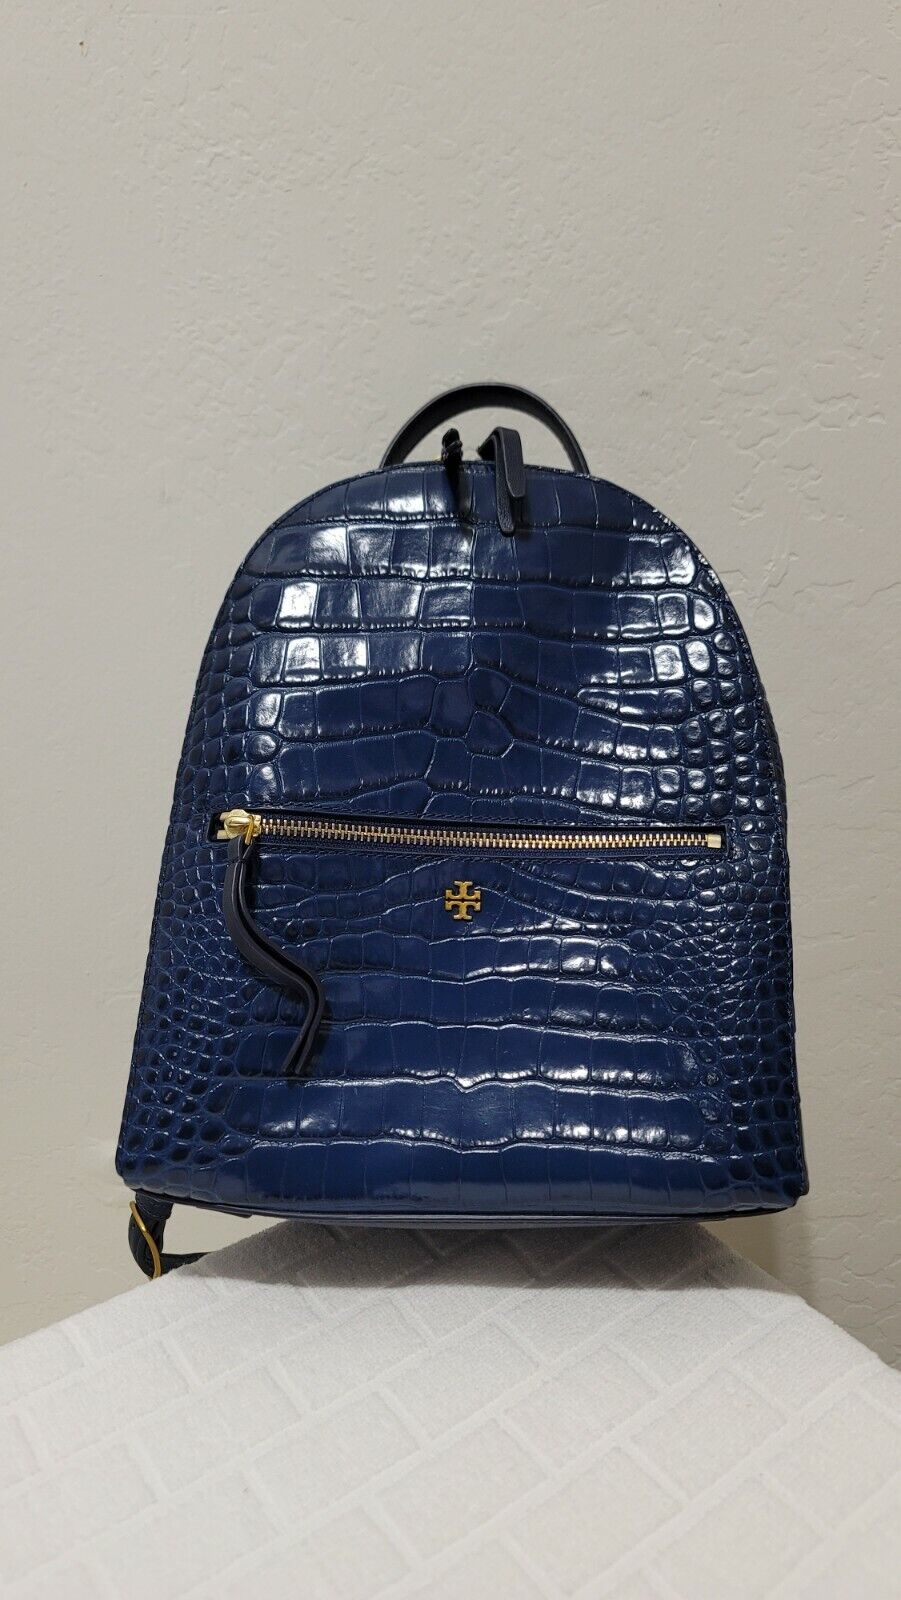 Tory Burch Navy Blue Croc-Embossed Mini Small Leather Backpack $495 | eBay